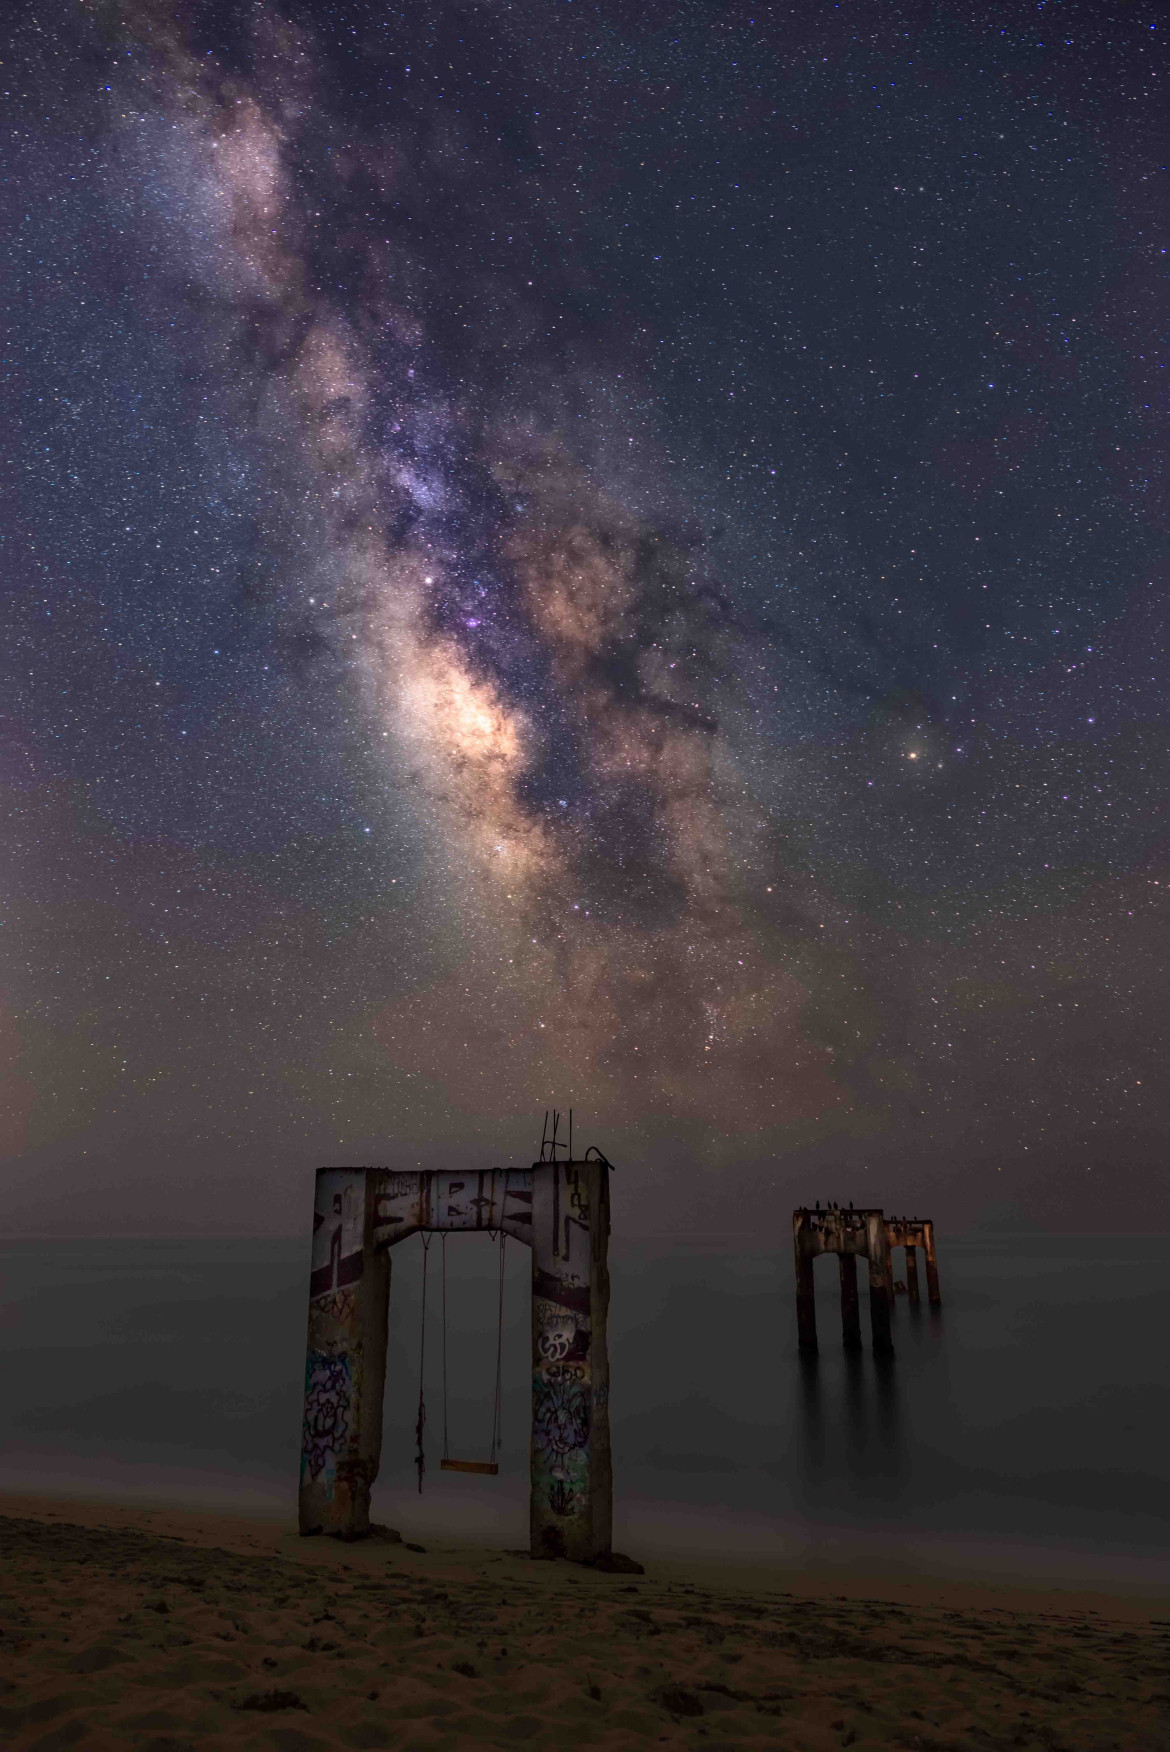 fot. Marcin Zając, "The Remnants", finalista kategorii Scyscapes / Insight Investment Astronomy Photographer of the Year 2019